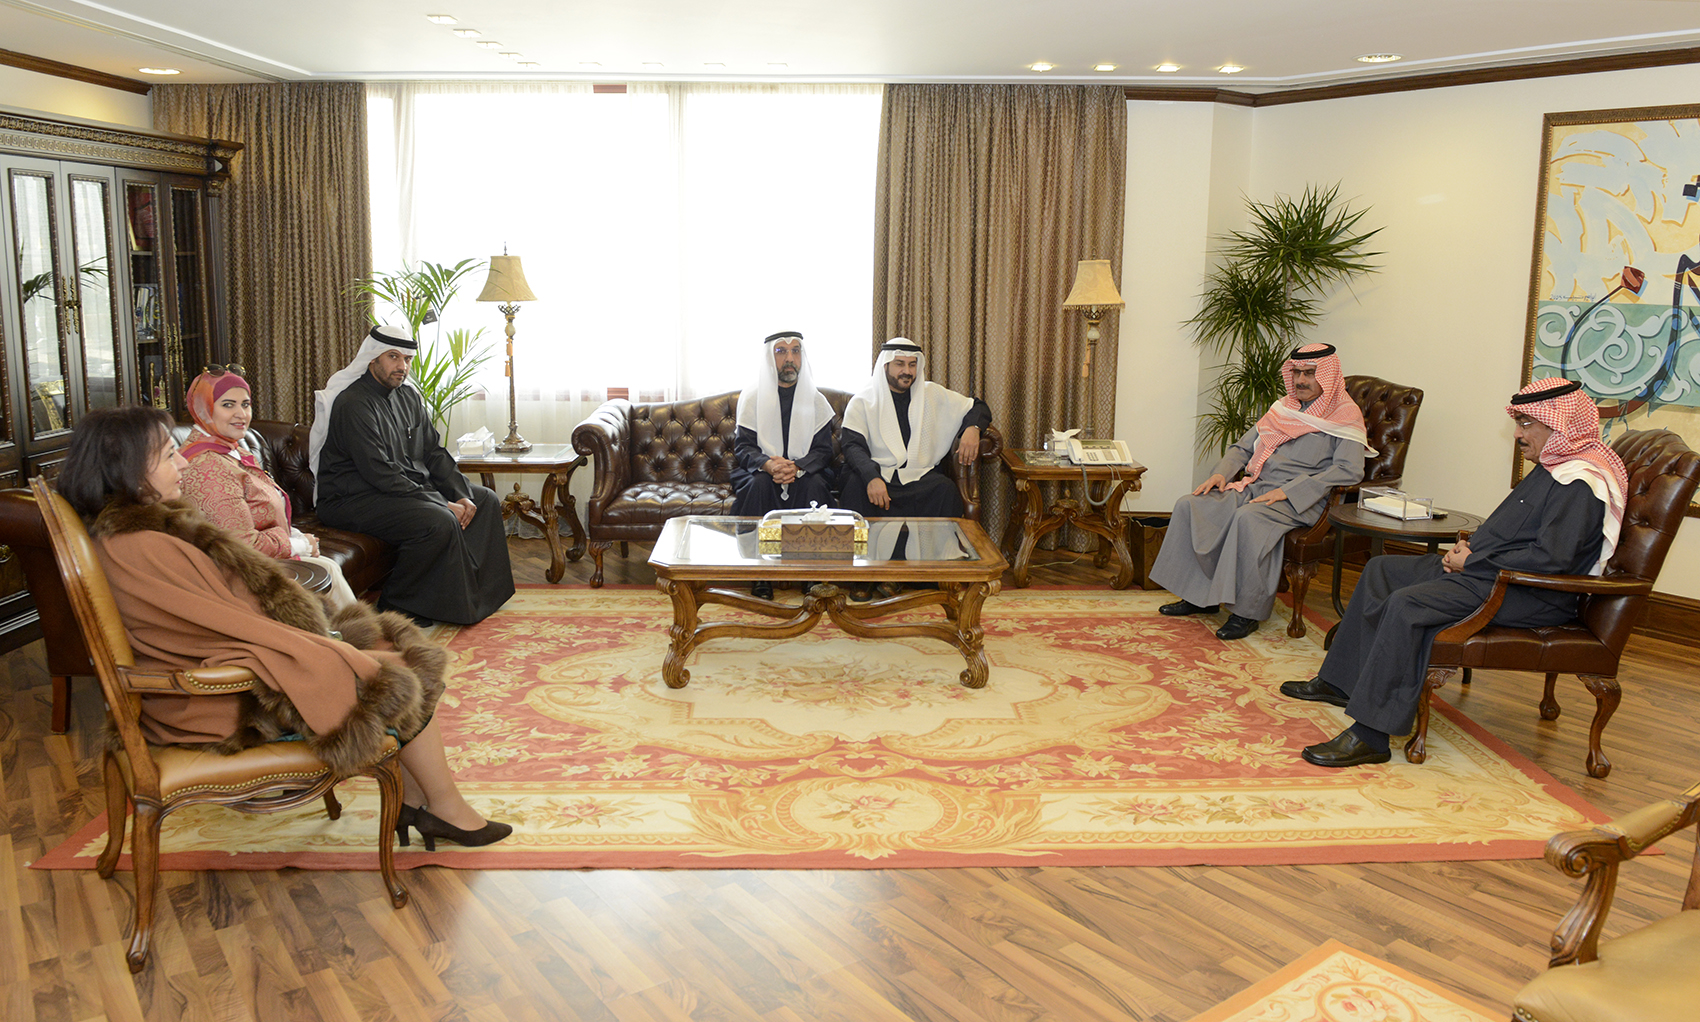 KUNA's Chairman and Director General received PAAET teaching staff